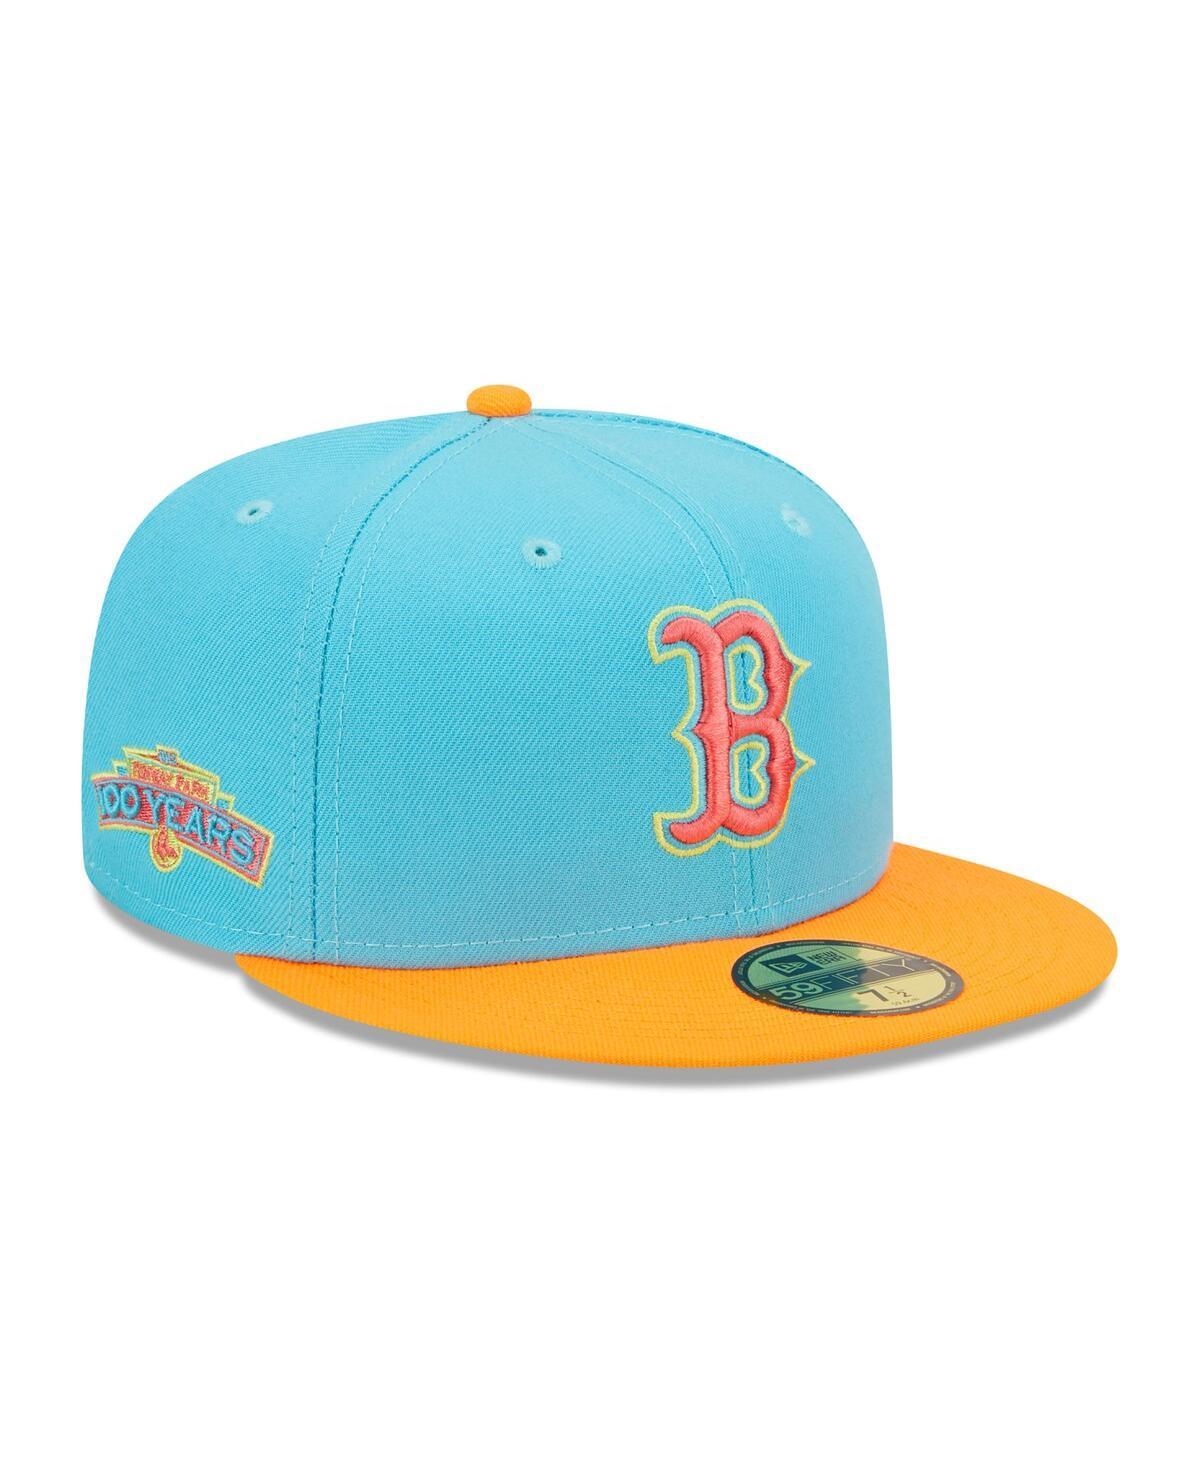 red sox blue and yellow hat